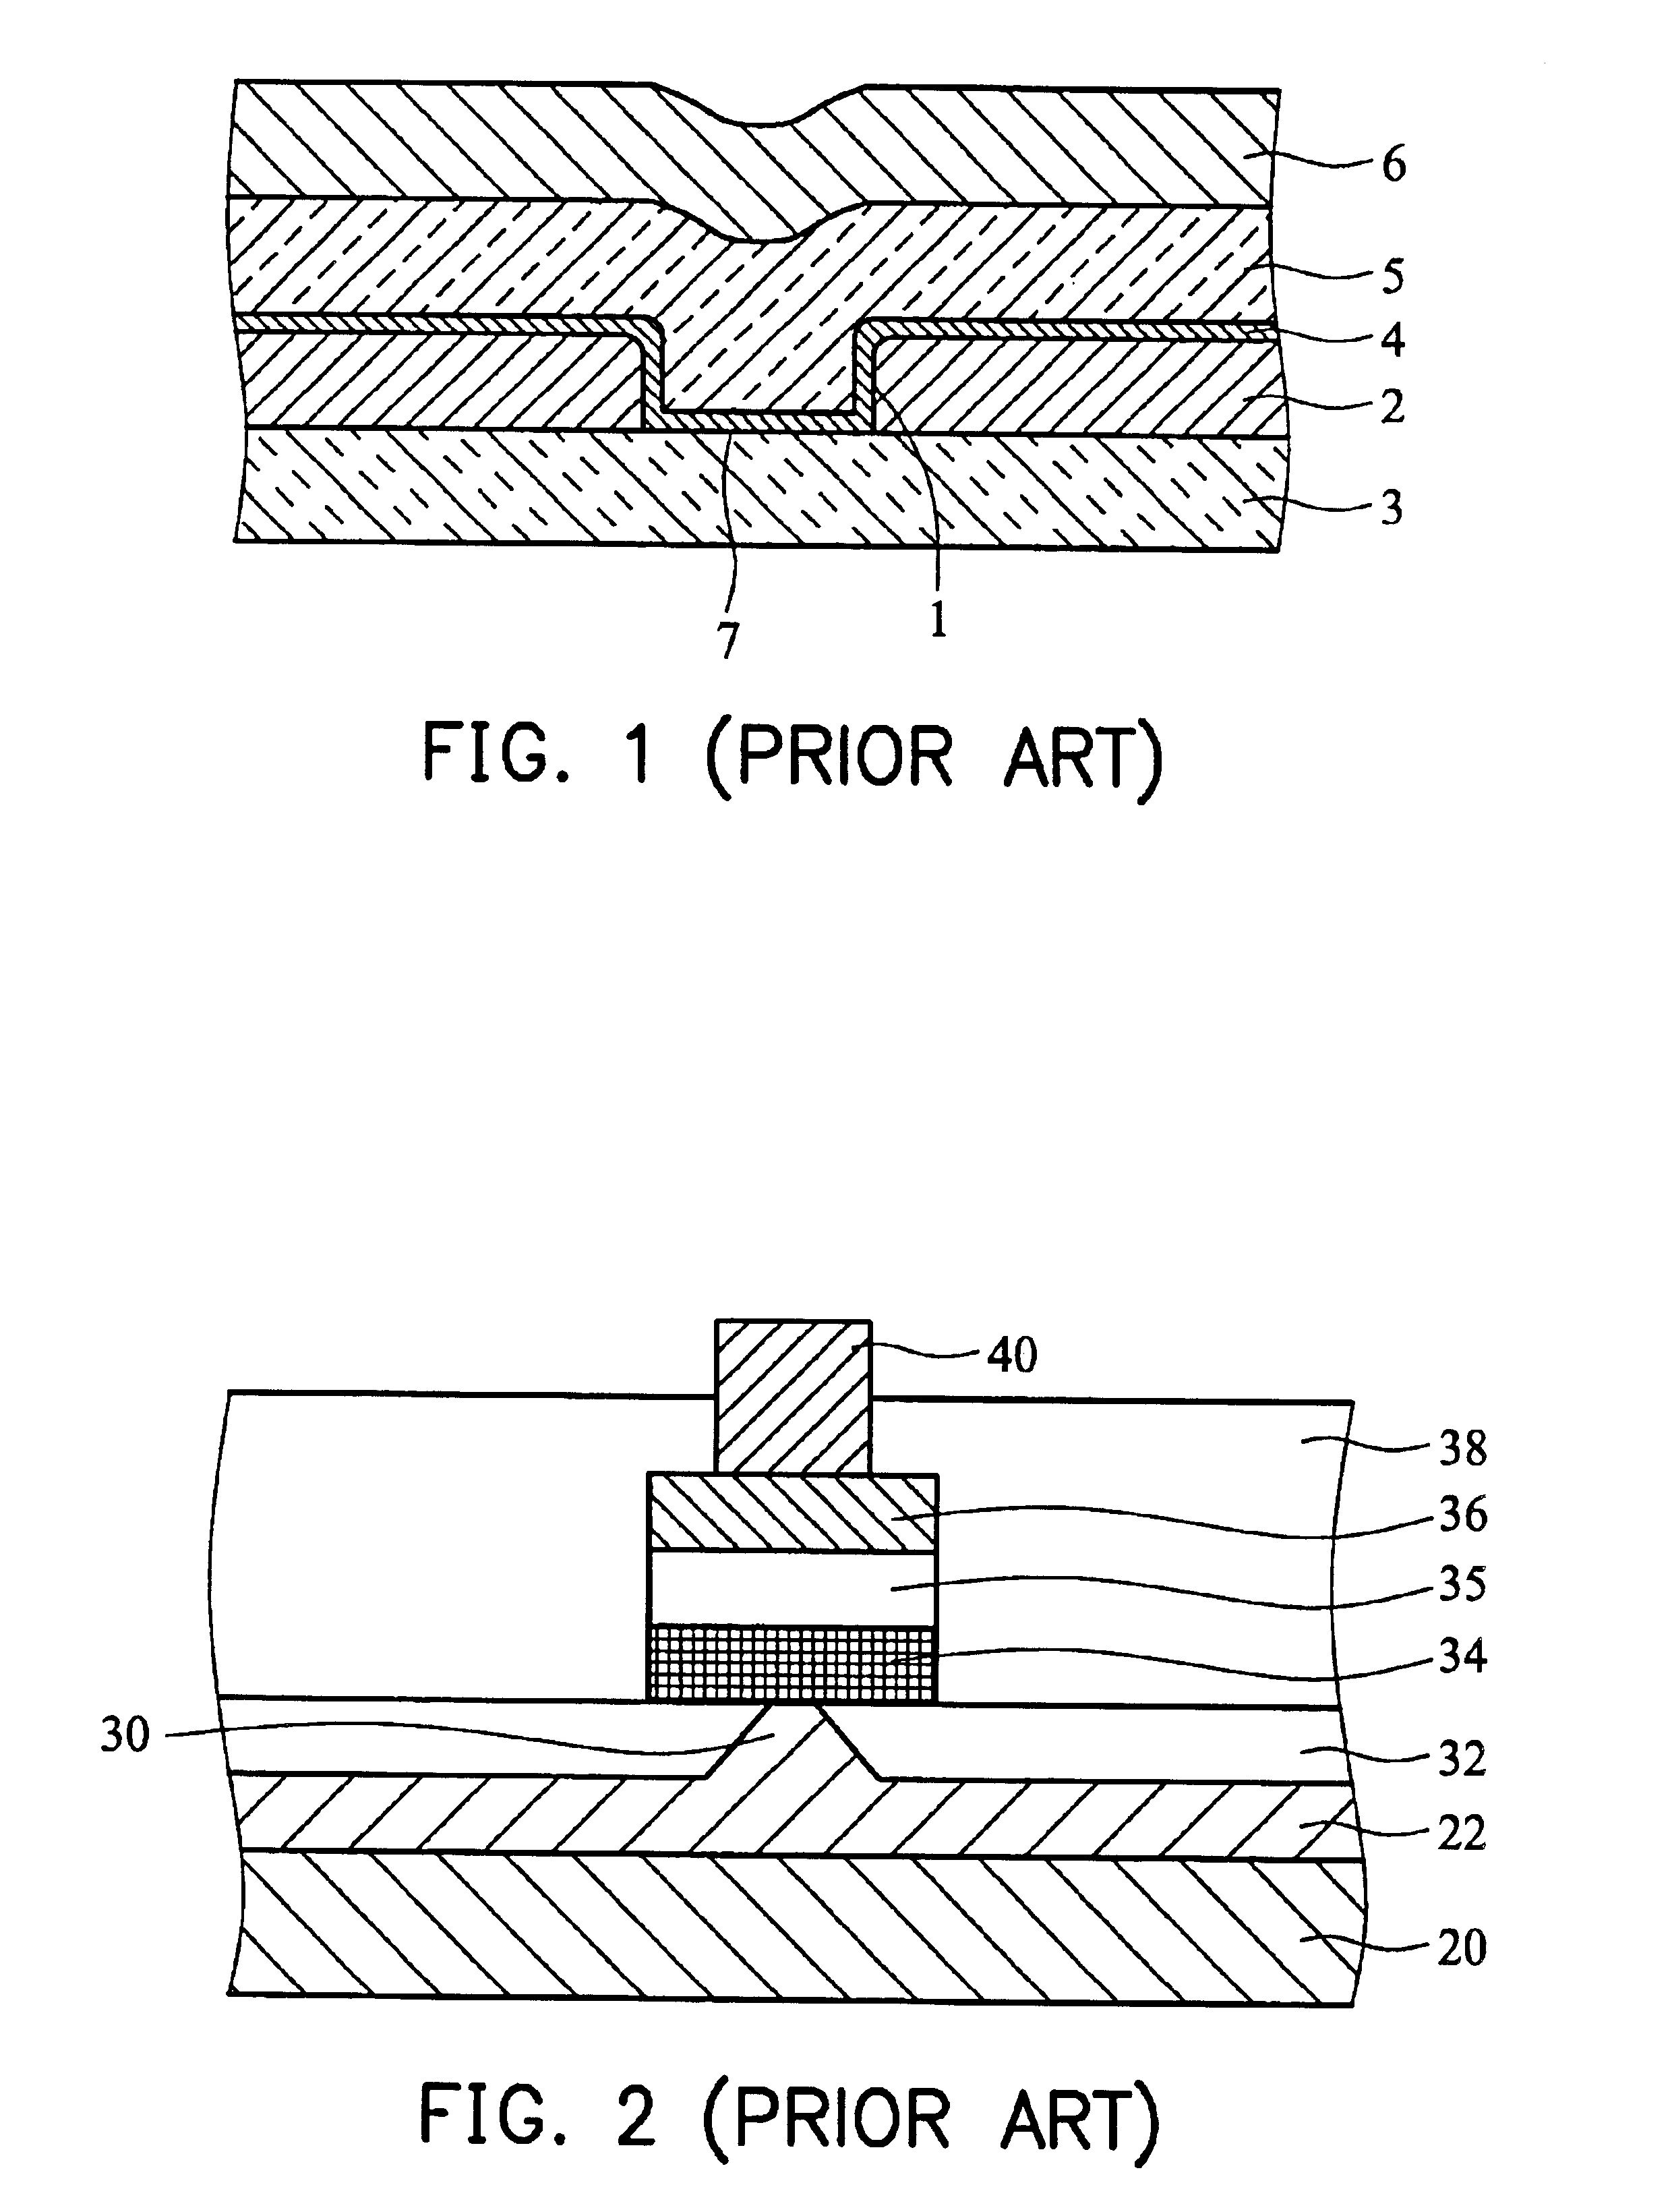 Chalcogenide memory device with multiple bits per cell